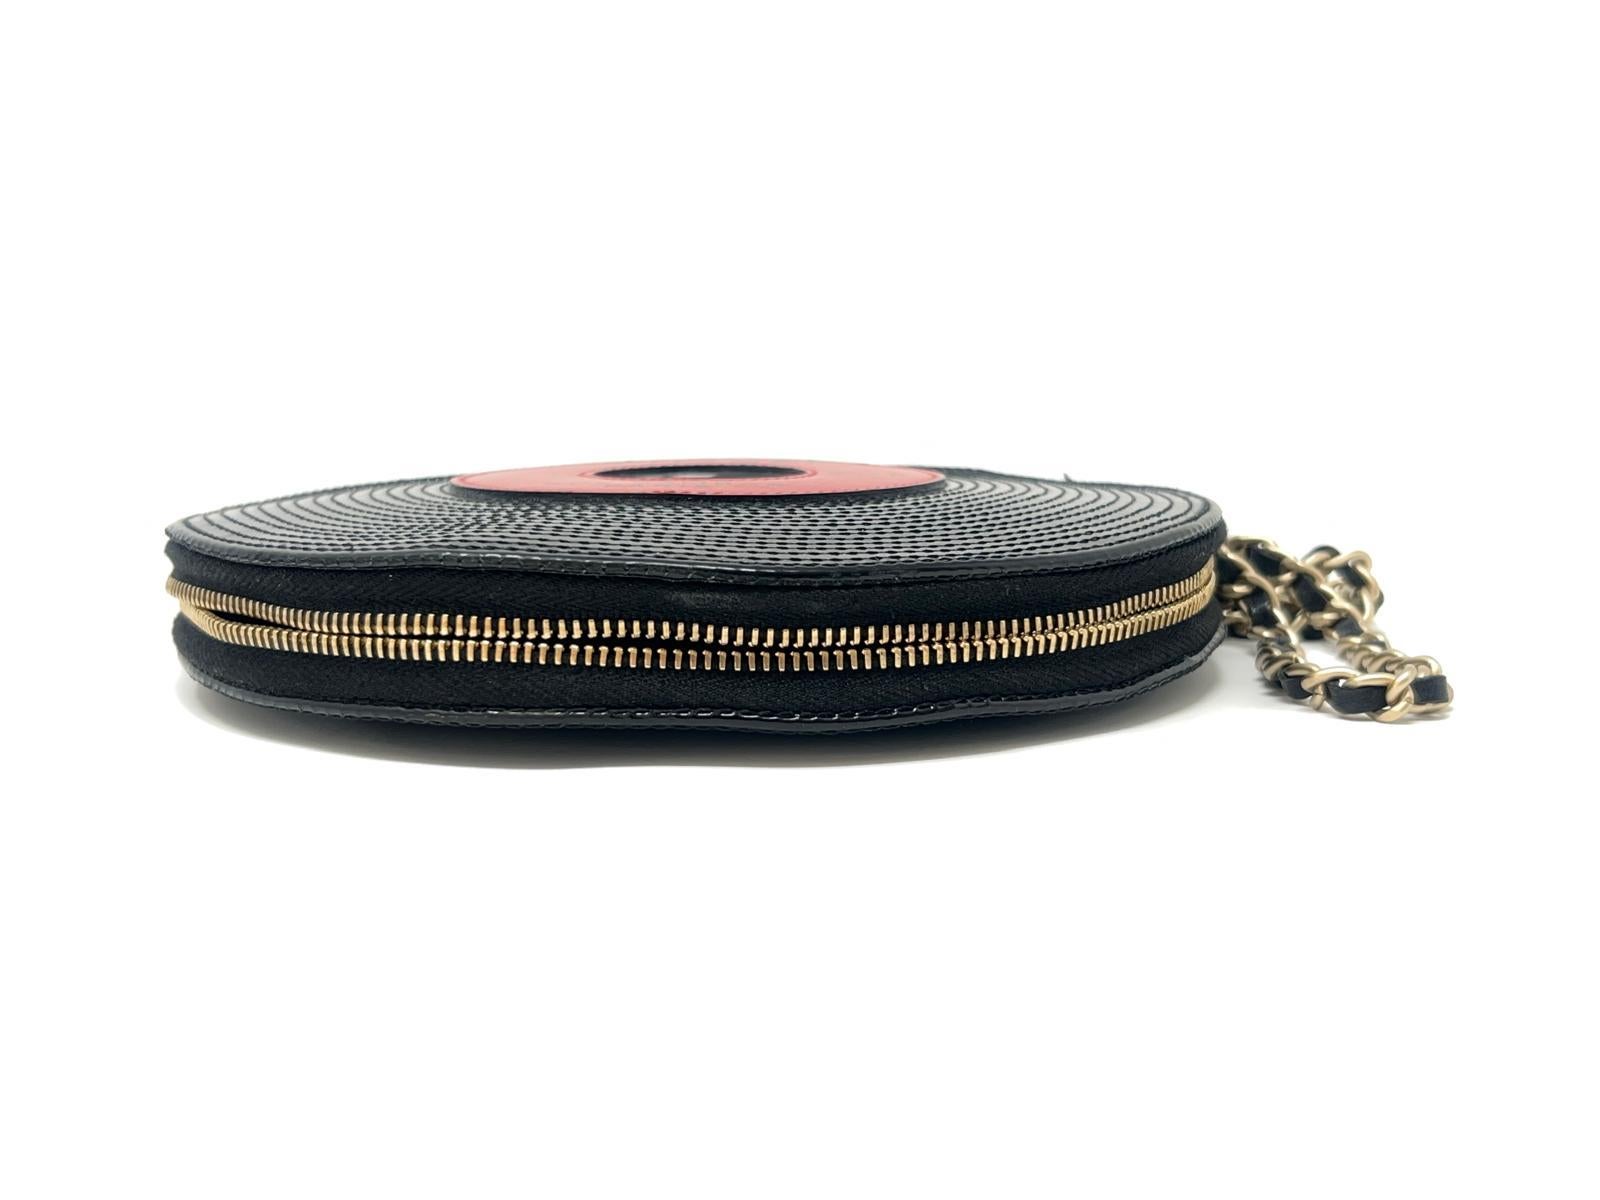 This beautiful record shaped Chanel wrislet is a show stopper, black patent leather around a red striking circle reading 